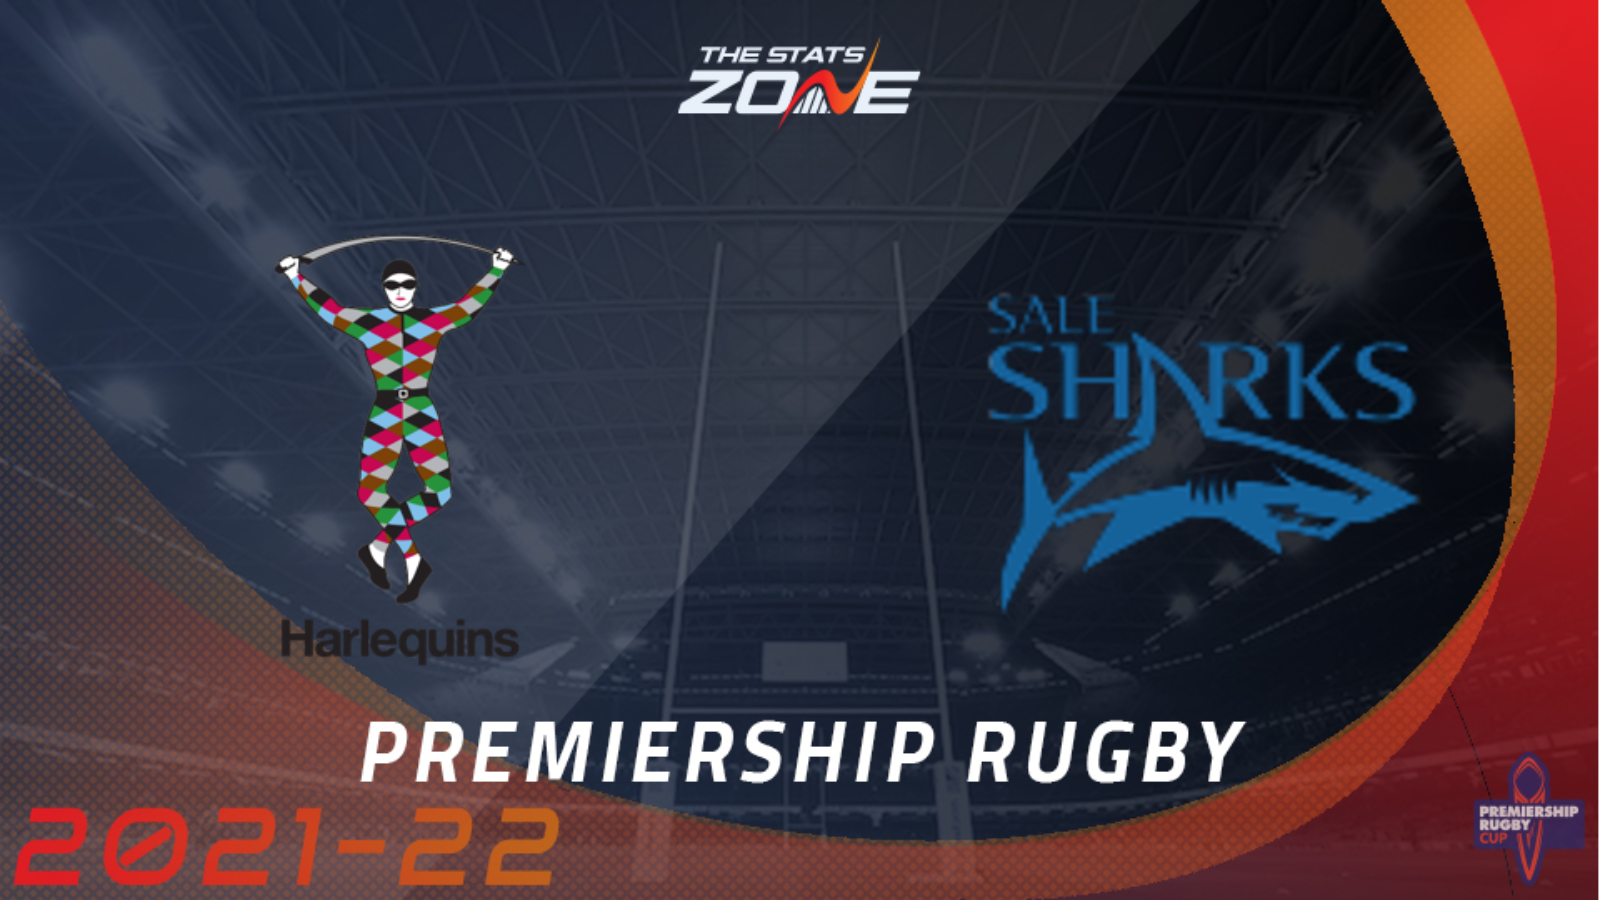 Harlequins vs Sale Sharks Preview and Prediction